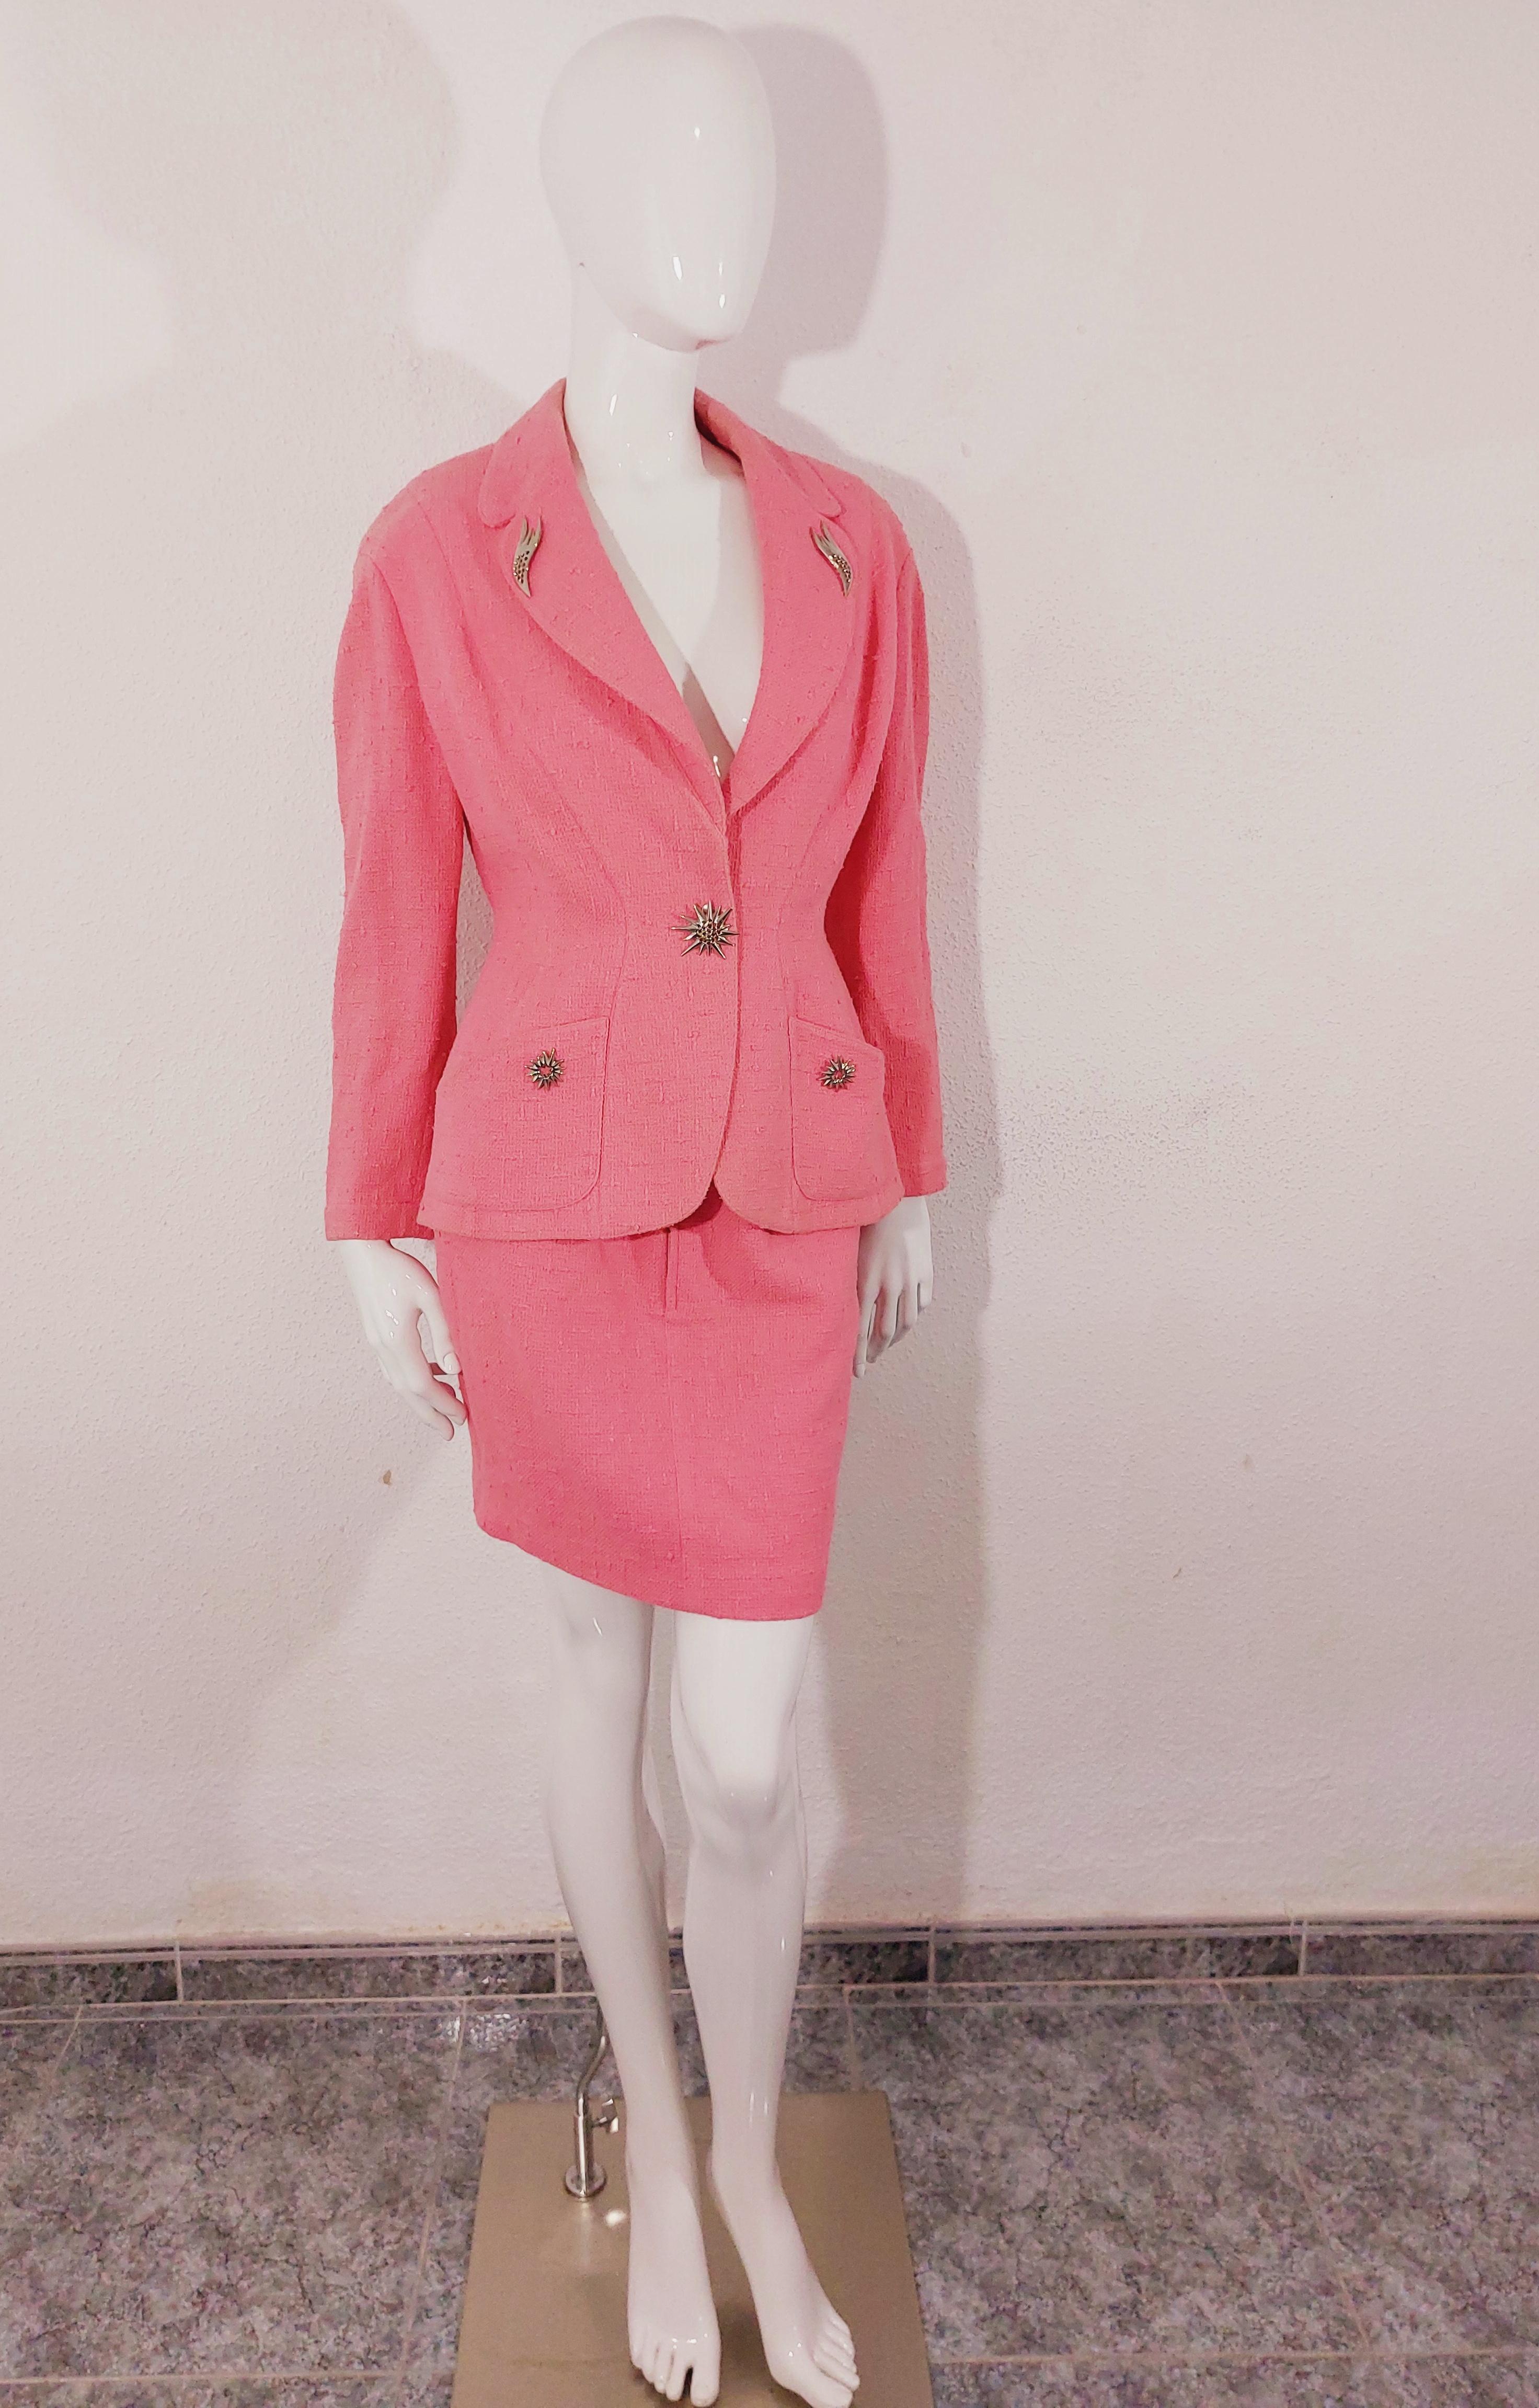 Thierry Mugler Couture Brooch FW 1990 Sculptural Exaggerated Dramatic Silhouette Jacket Pink Silver Badge Pin Blazer Coat Jacket Skirt Suit
Fabulous rare Thierry Mugler suit, FW 1990s Collection. This dramatic sculptural silhouette is truly